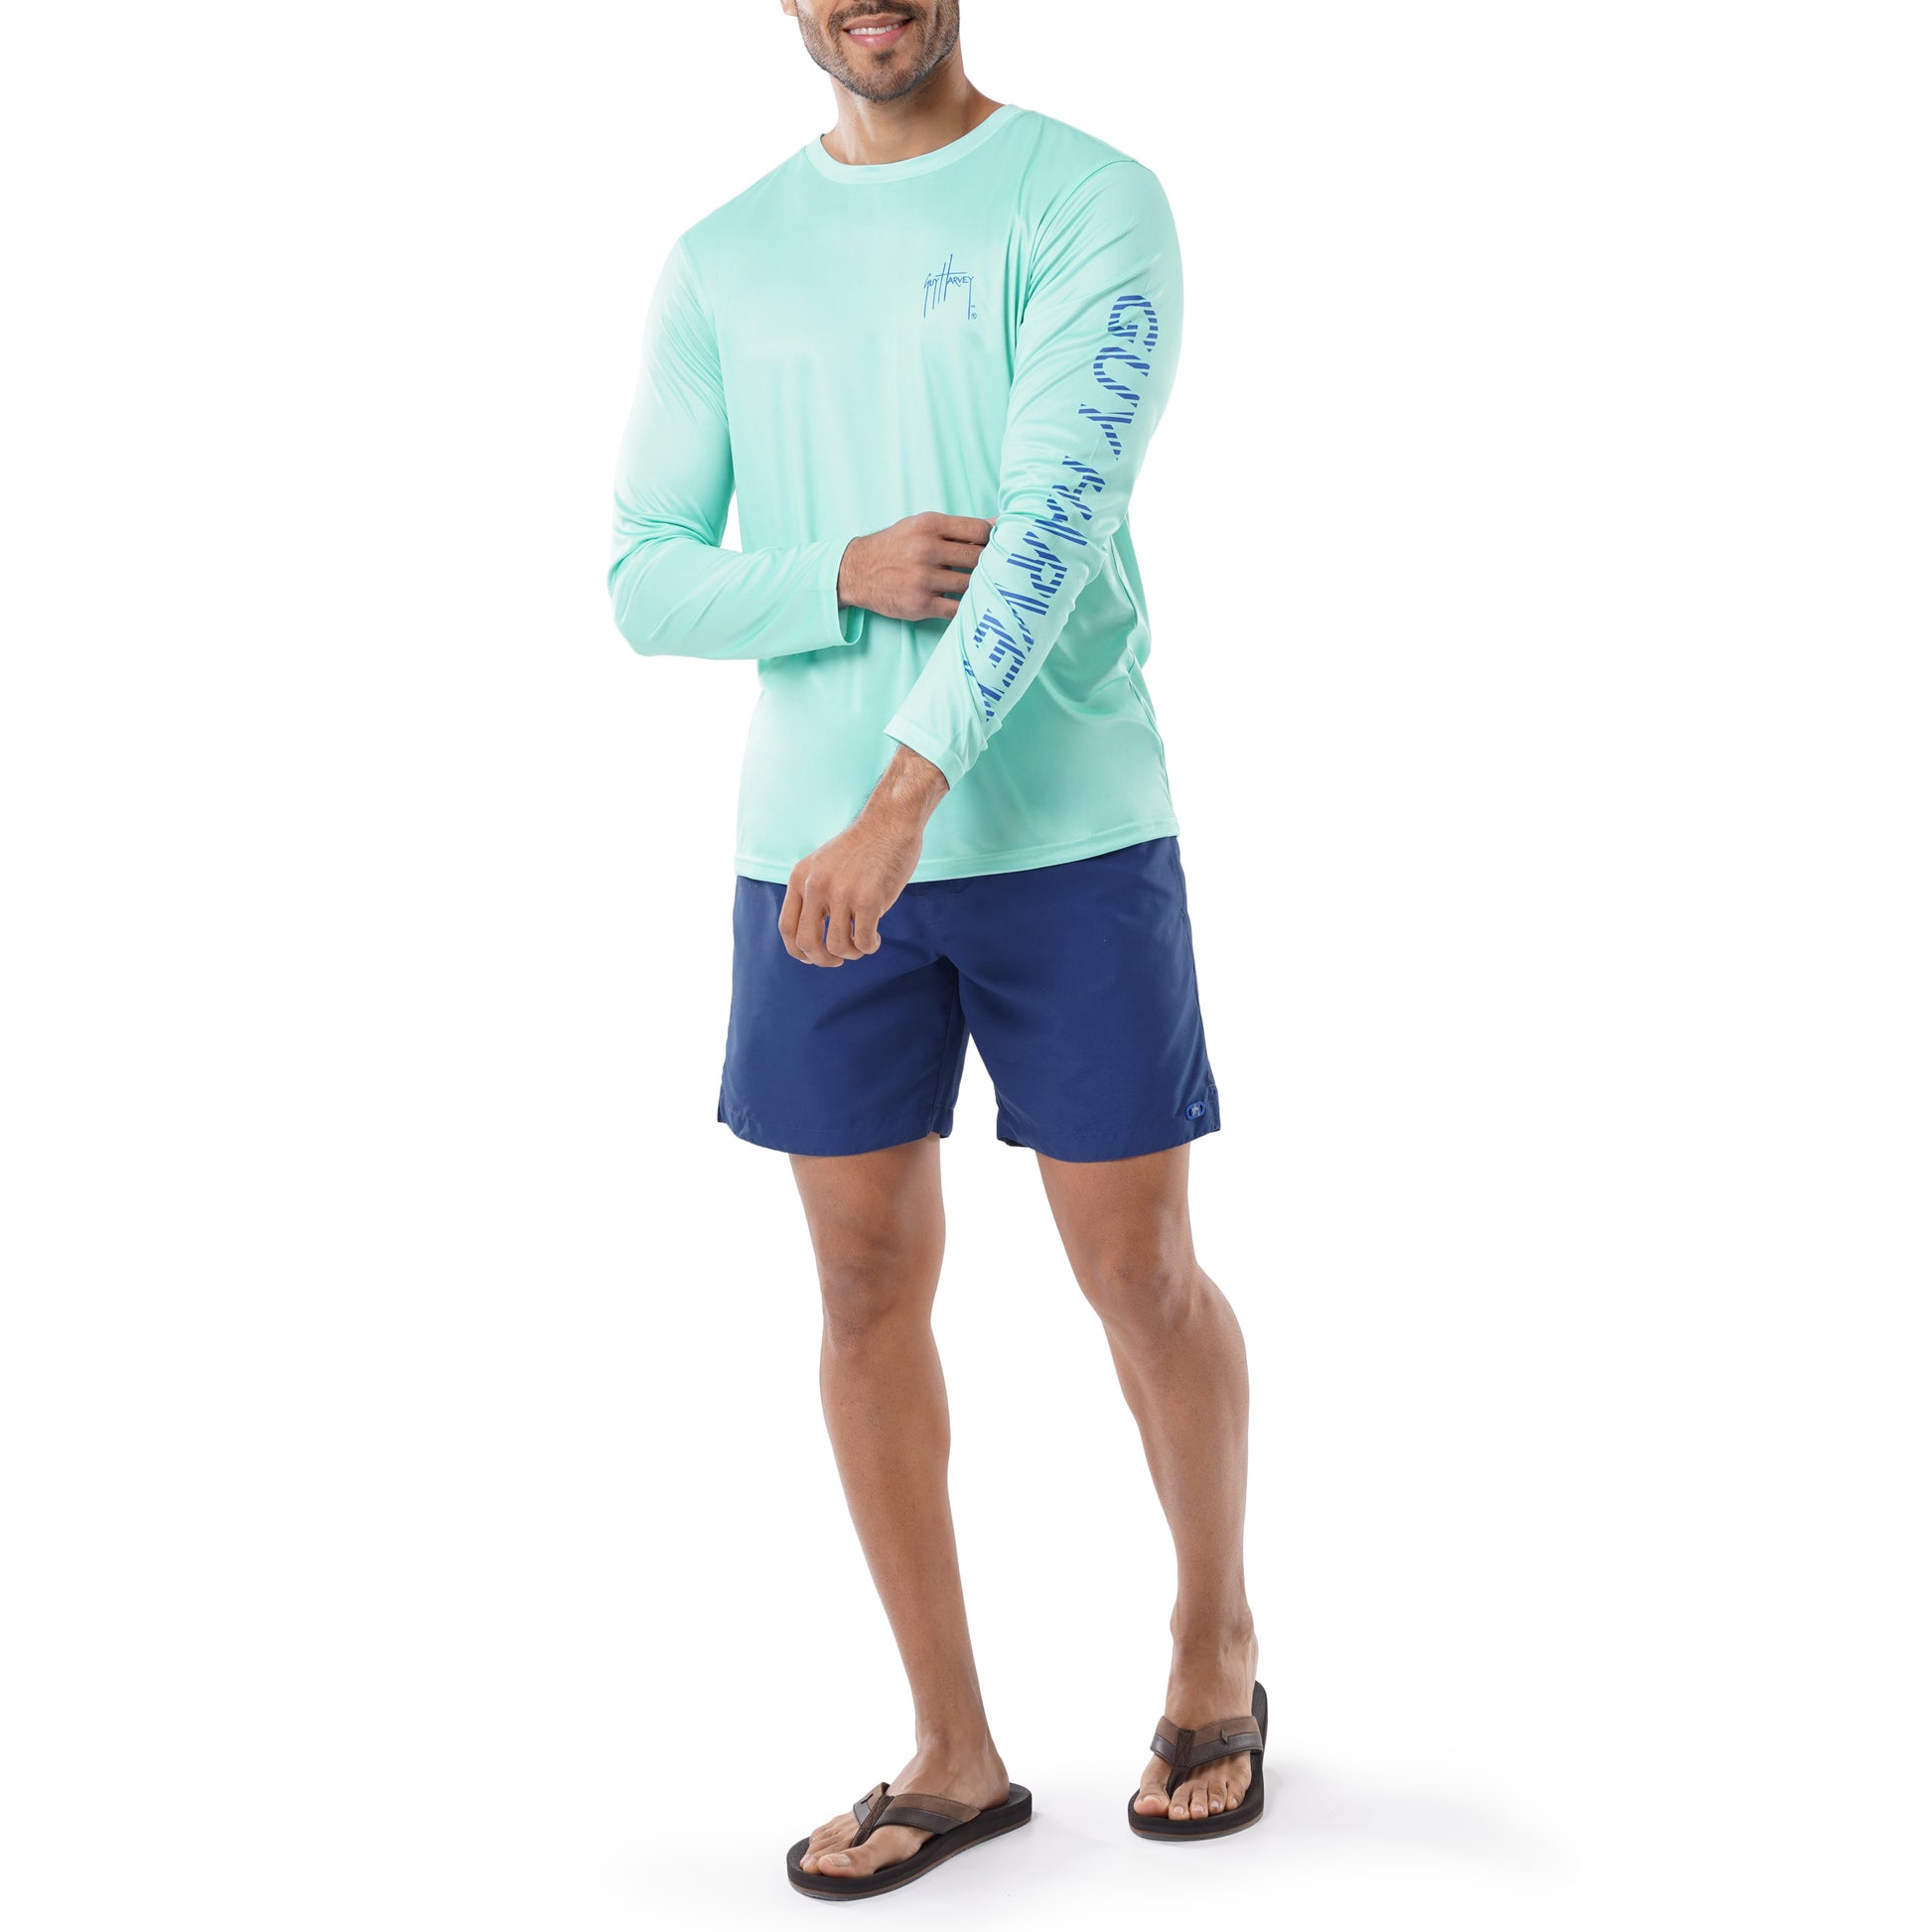 Men's Offshore Fishing Performance Sun Protection Top View 7